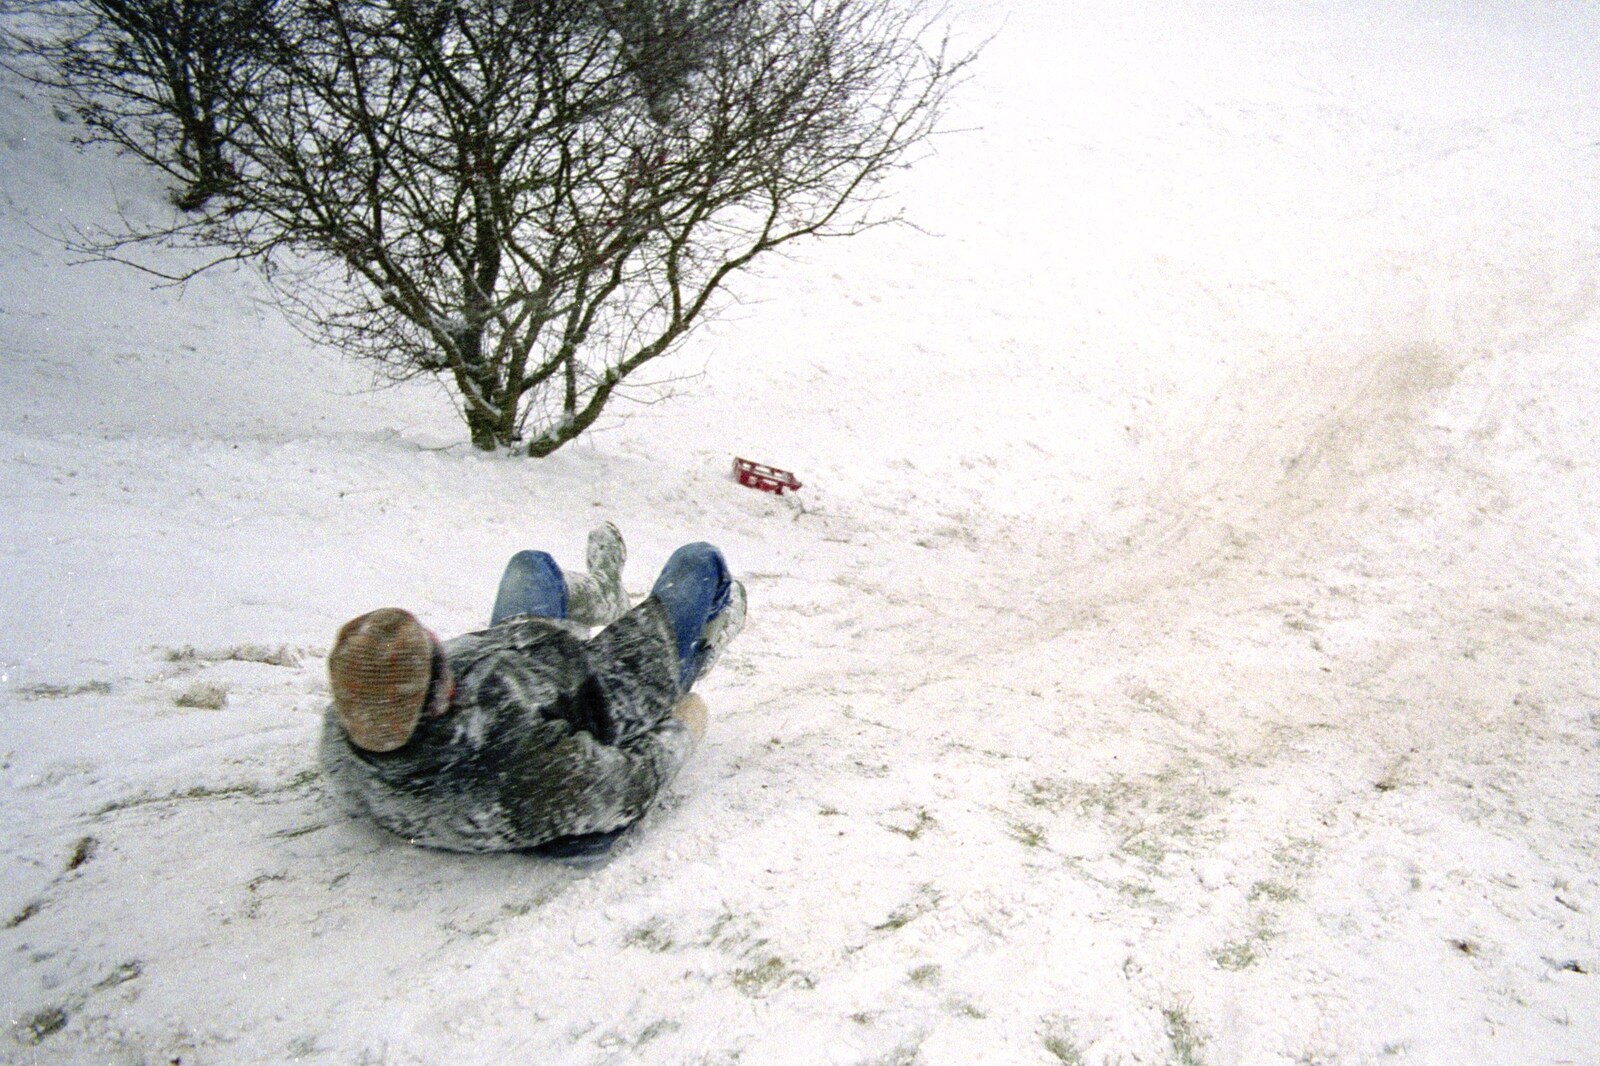 Geoff slides down the hill on Stuston common from Sledging on the Common and Some Music, Stuston, Suffolk - 5th February 1991